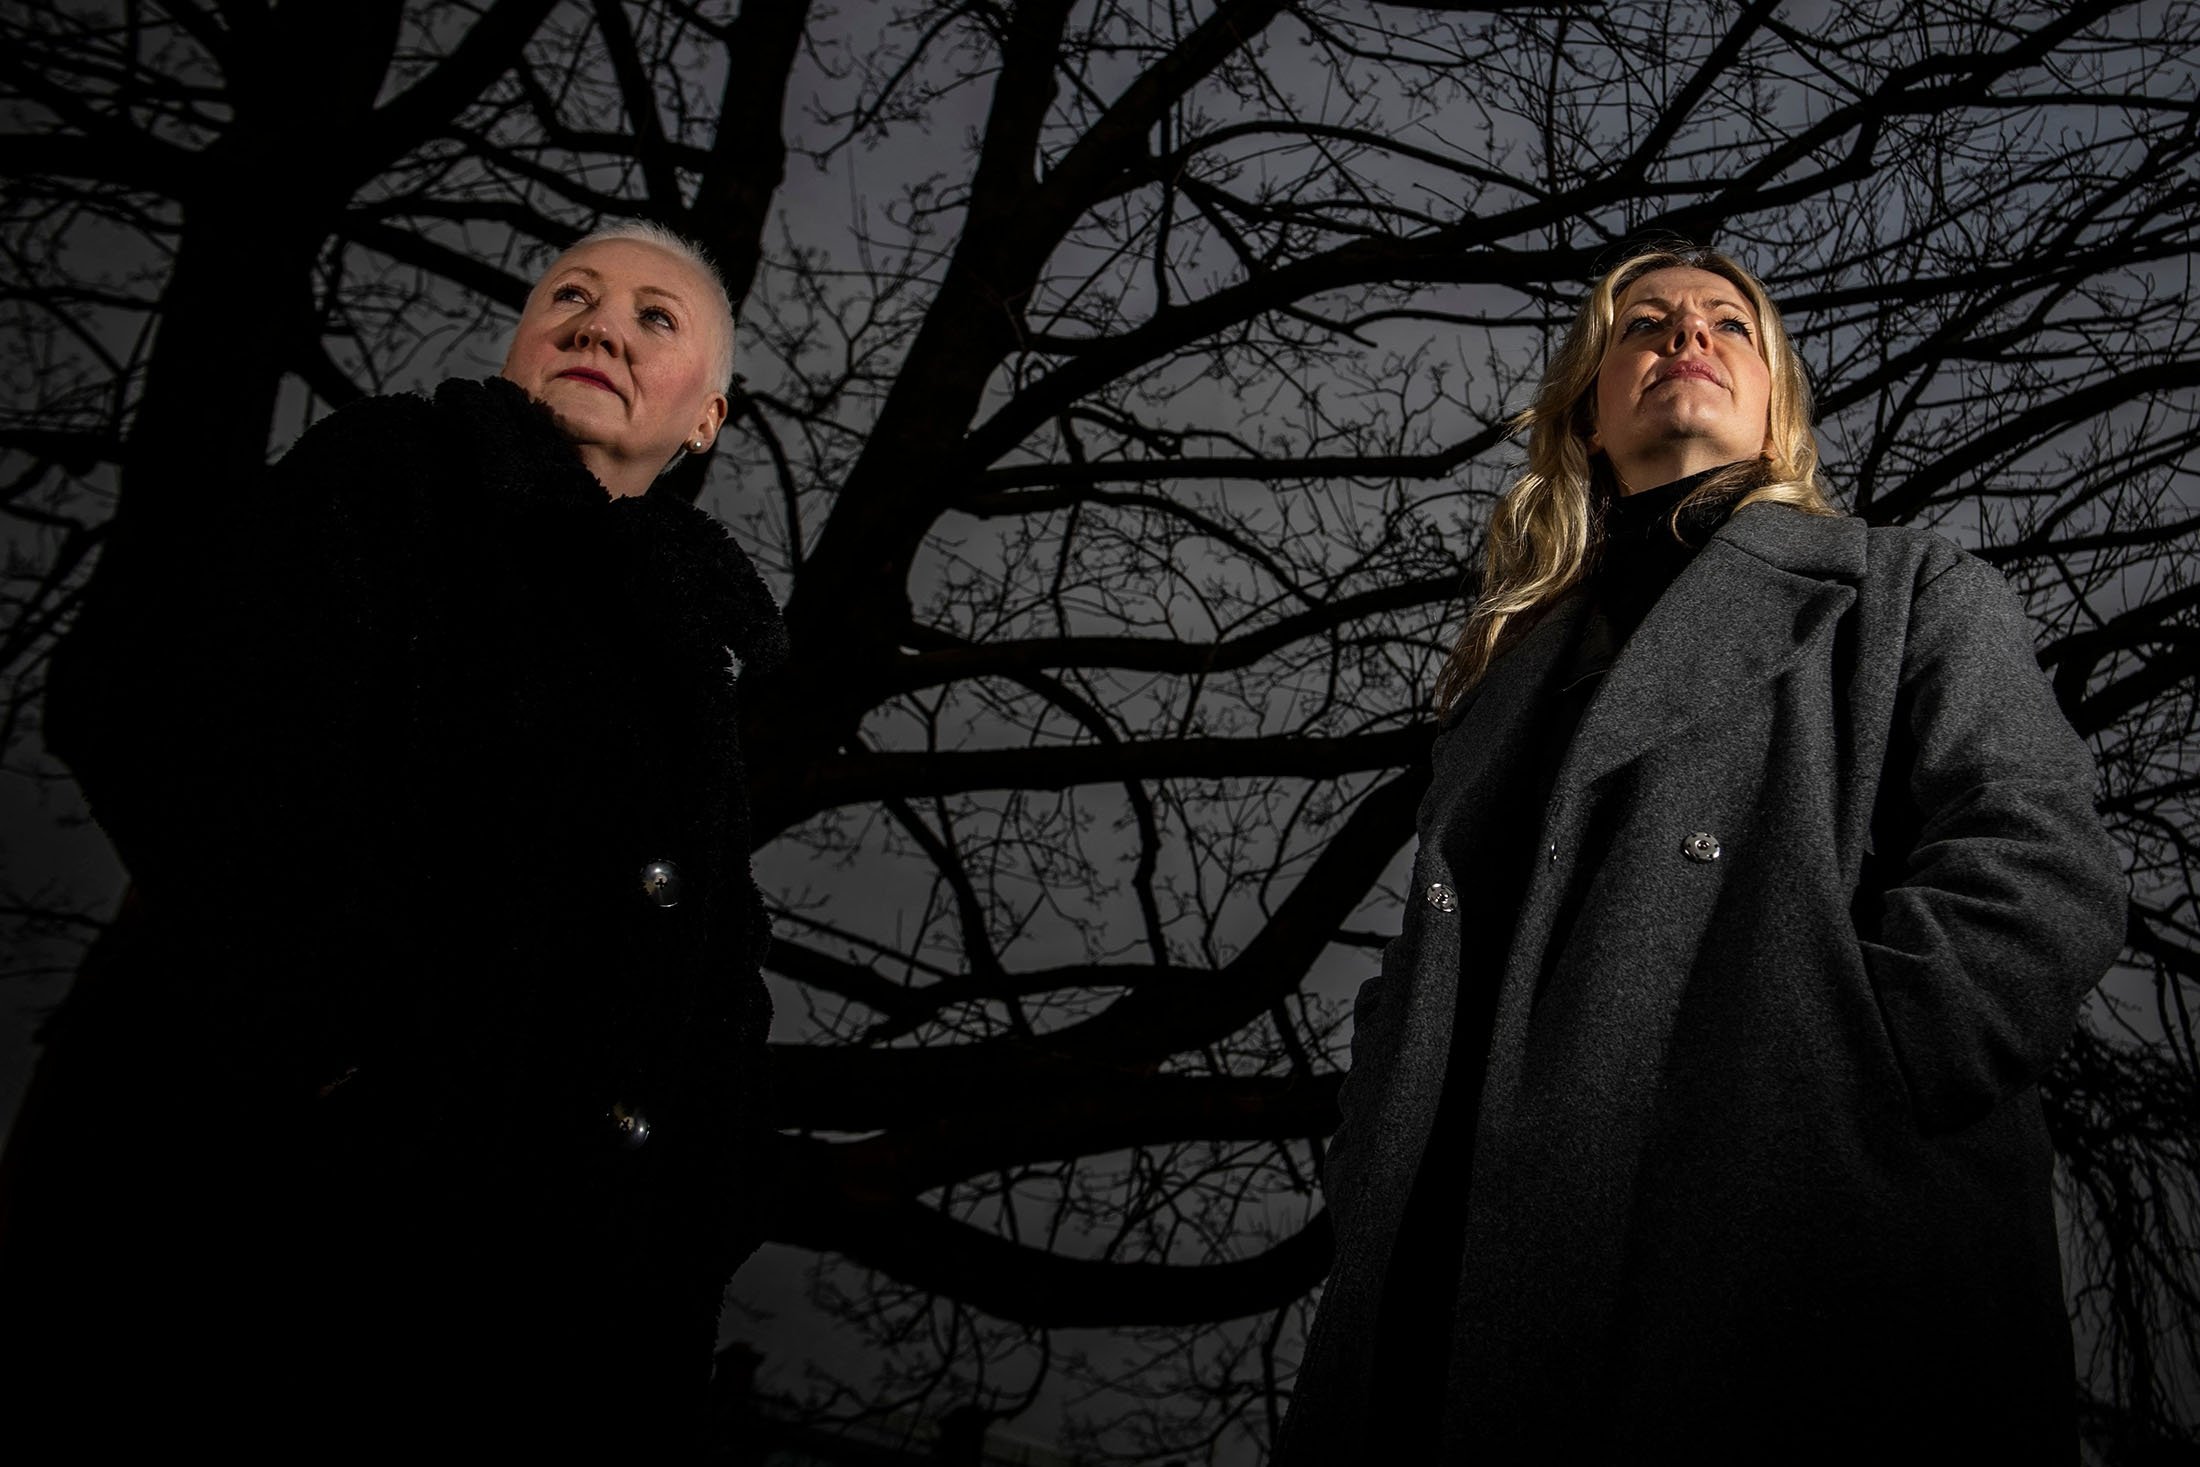 Founder of the association "Witches of Scotland" Claire Mitchell and member Zoe Venditozzi pose for pictures in the Howff Cemetery in Dundee, Scotland, Jan. 30, 2022. (AFP Photo)